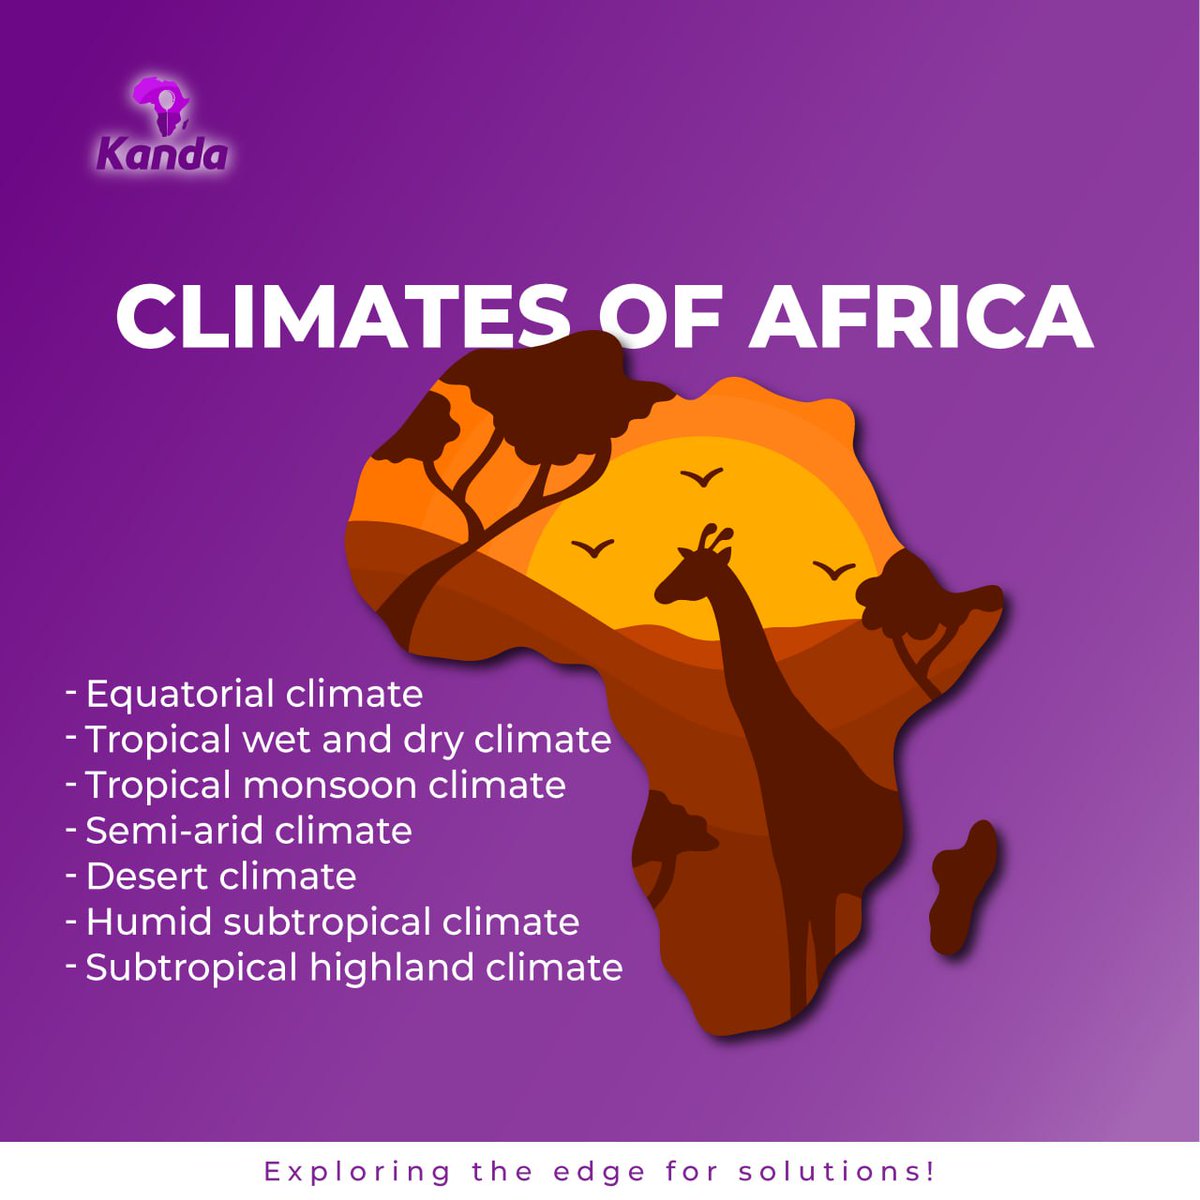 Explore Africa's diverse climates with KandaWeather: - Equatorial 🌴 - Tropical wet and dry 🌧️ - Tropical monsoon 🌊 - Semi-arid 🌵 - Desert 🏜️ - Humid subtropical 🌦️ - Subtropical highland ⛰️ From lush rainforests to arid deserts, Africa's weather is as varied as its landscapes!